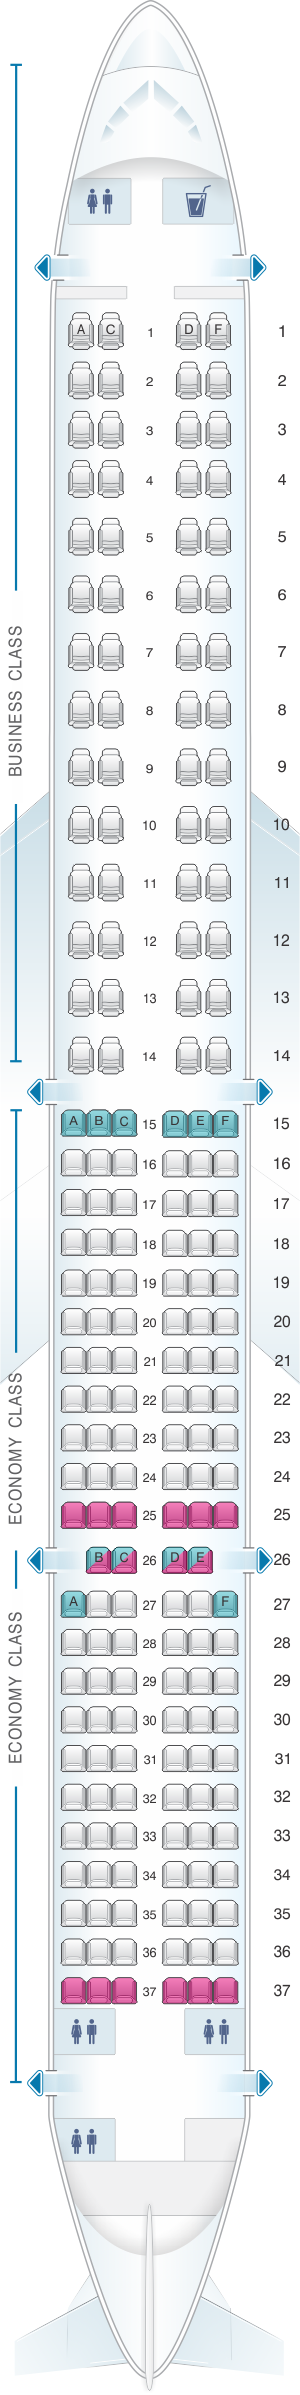 Seat map for British Airways Airbus A321 Neo